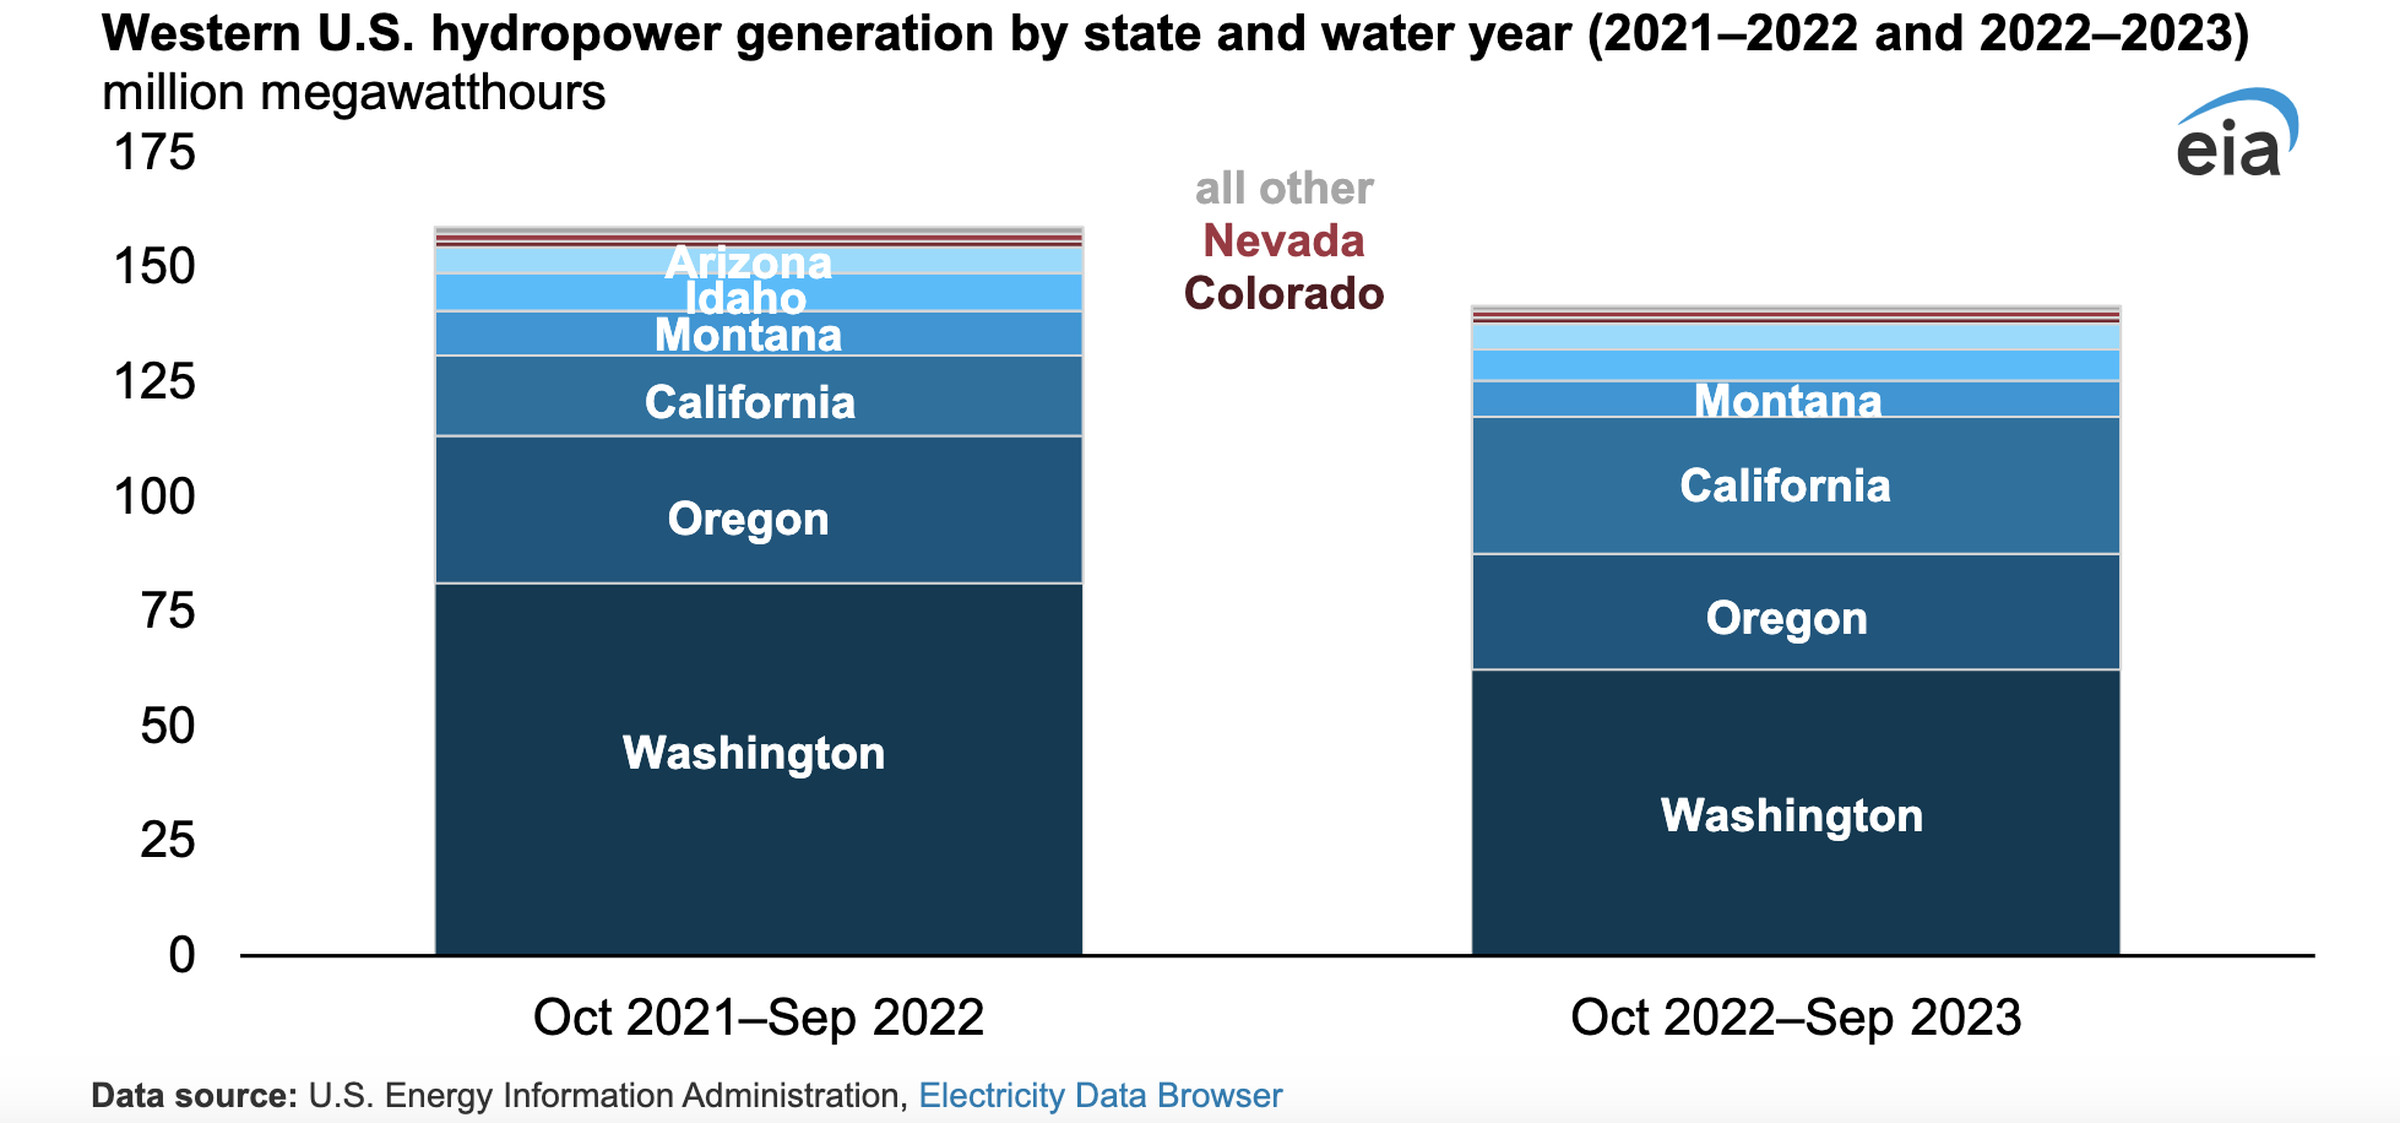 A bar graph compares hydropower generation in Western states between the 2021–2022 water year and the 2022–2023 water year. The bar is lower in 2022–2023, primarily from a drop in generation in Washington state.